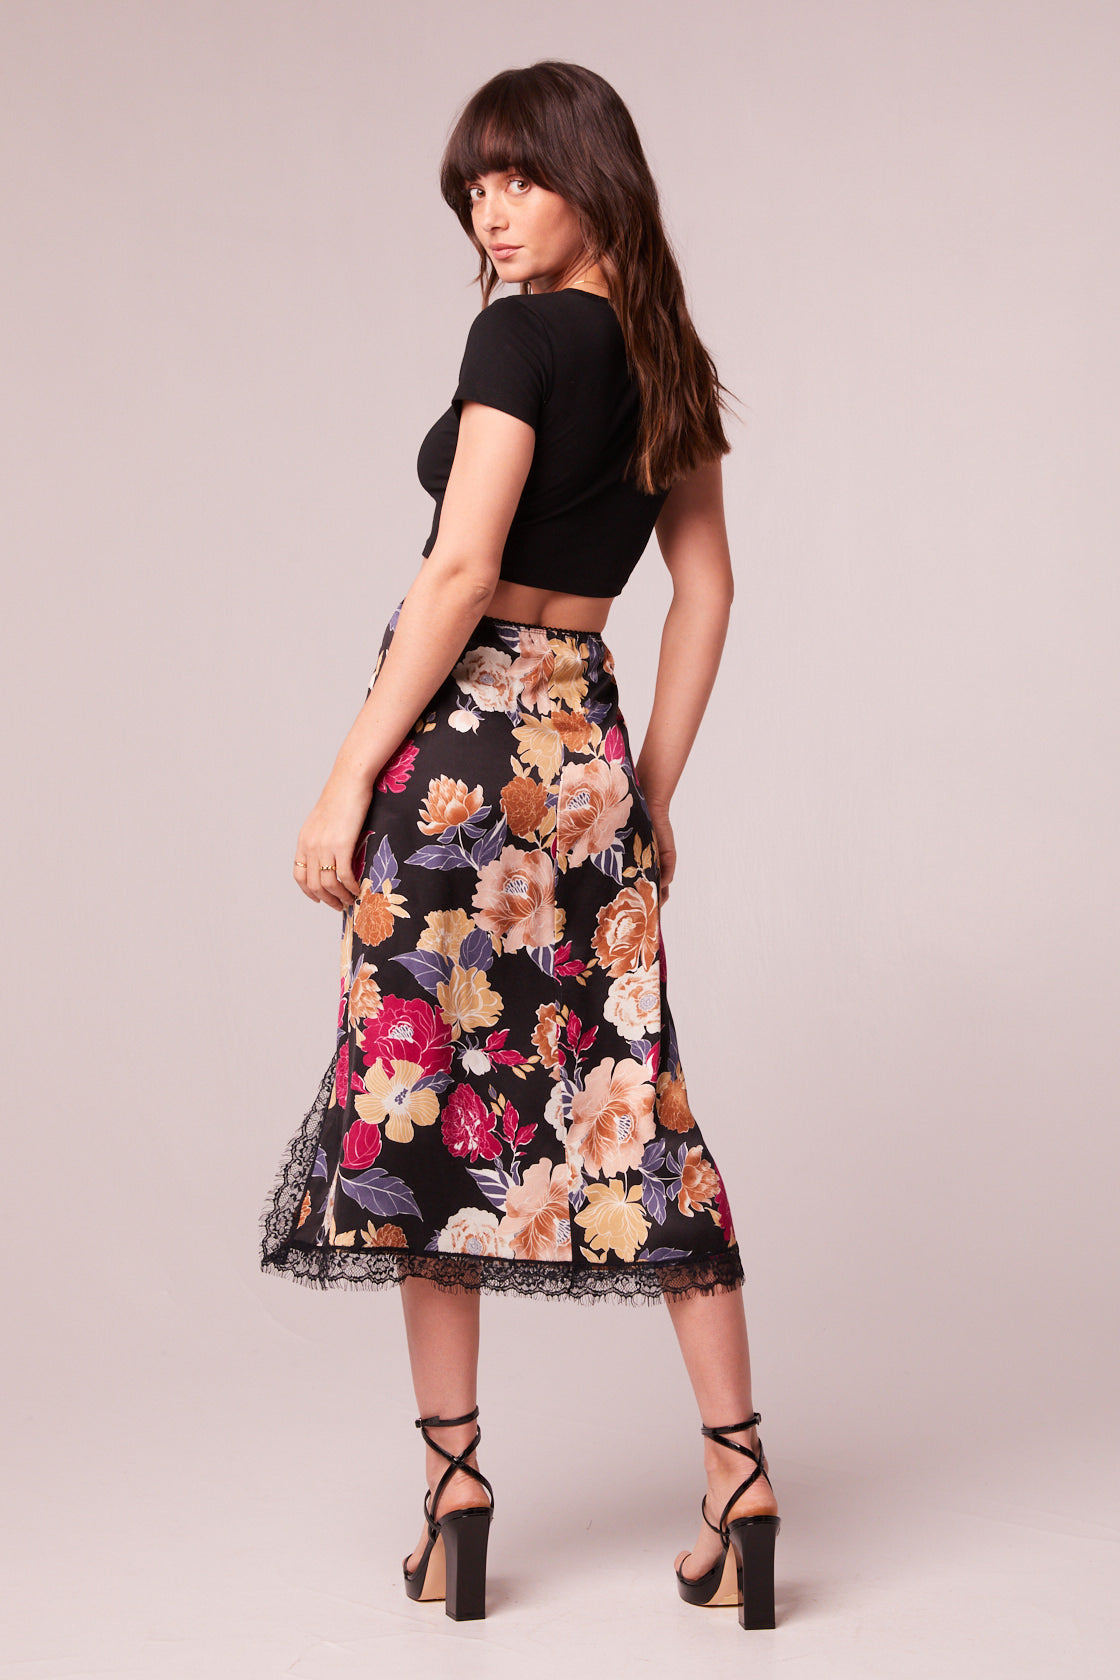 Lilou Black Floral Lace Slip Midi Skirt - band of the free